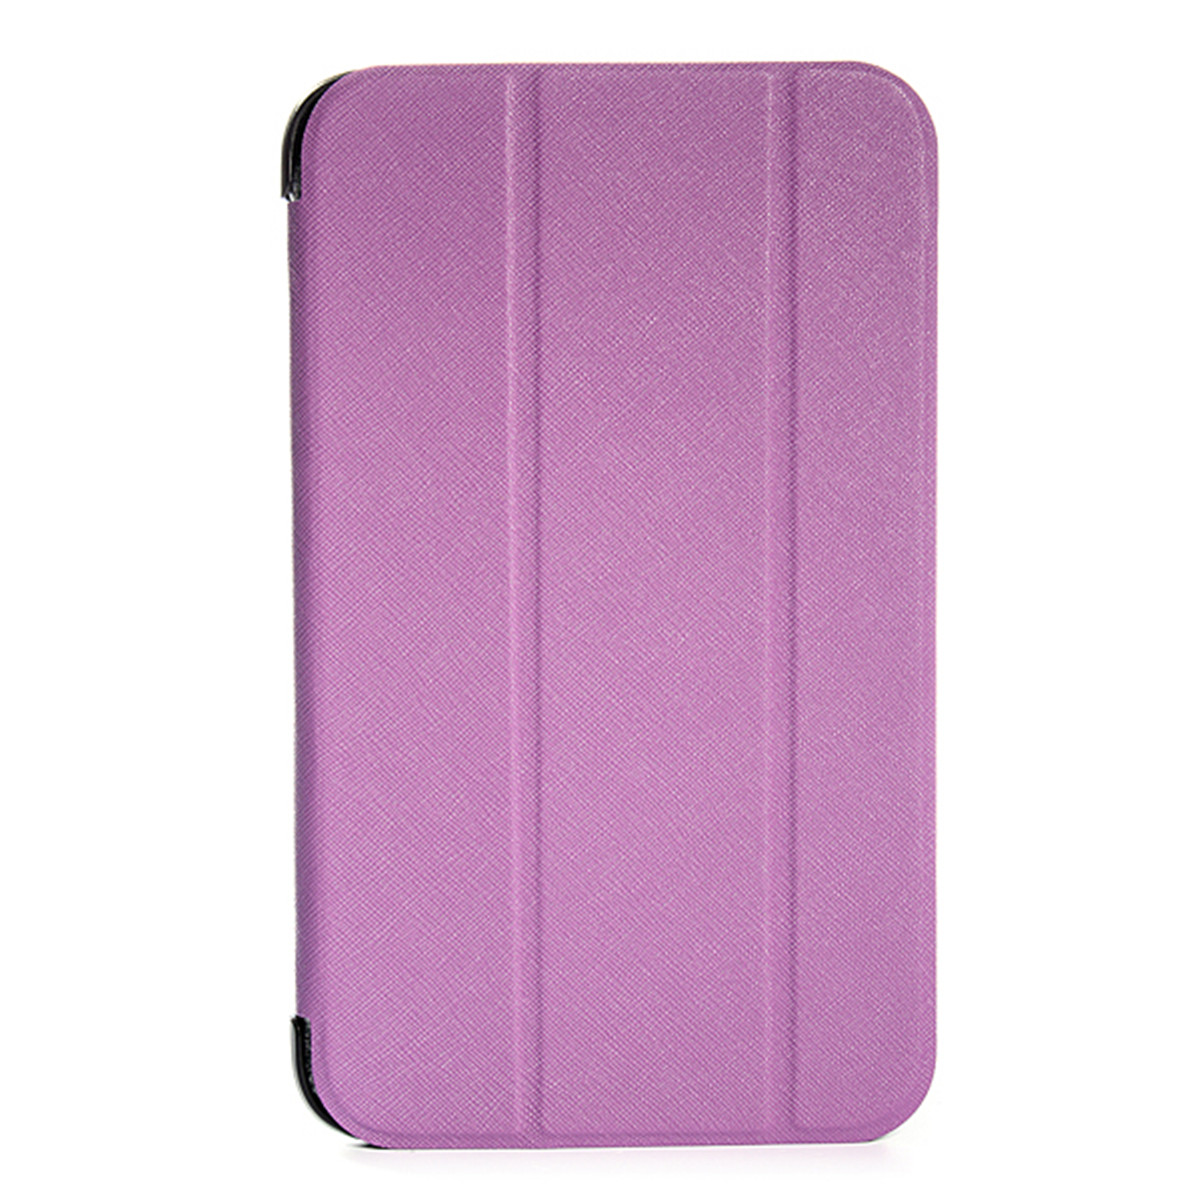 Tri-Fold-Tablet-Case-Cover-for-Samsung-Galaxy-Tab-3-80-T310-Tablet-1941339-1